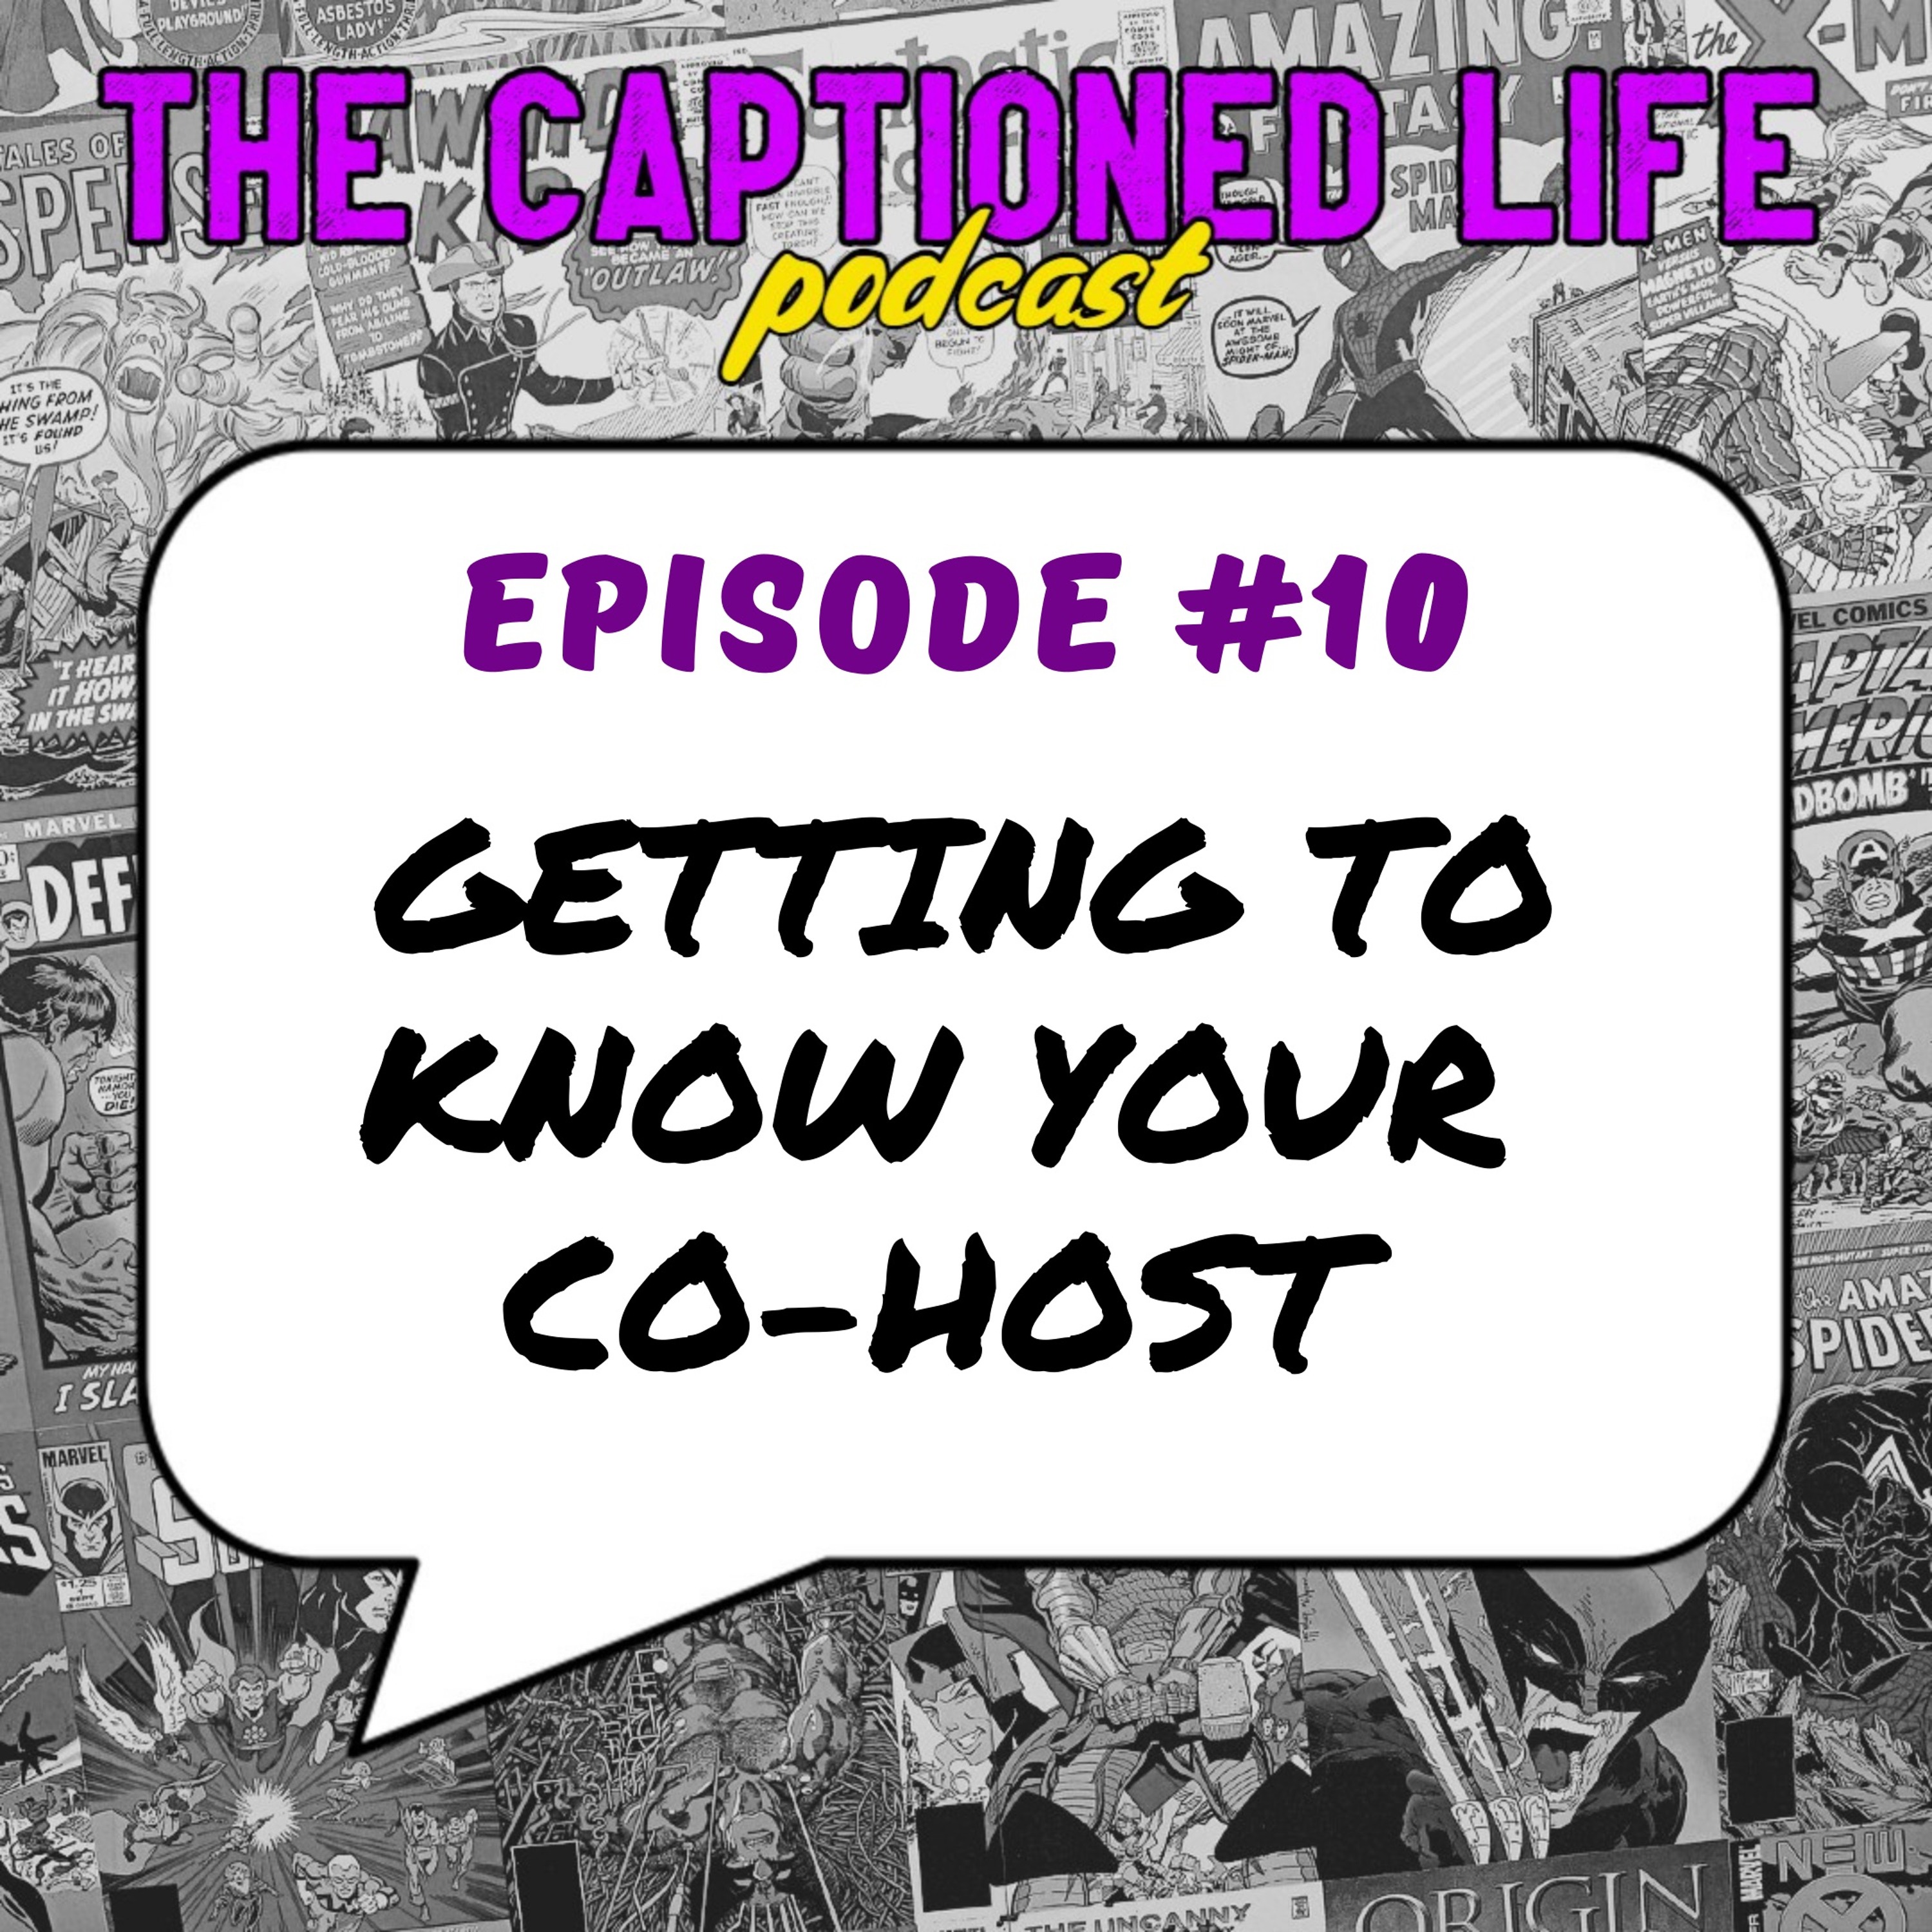 #10 Getting To Know Your Co-Host With James Caudill Image